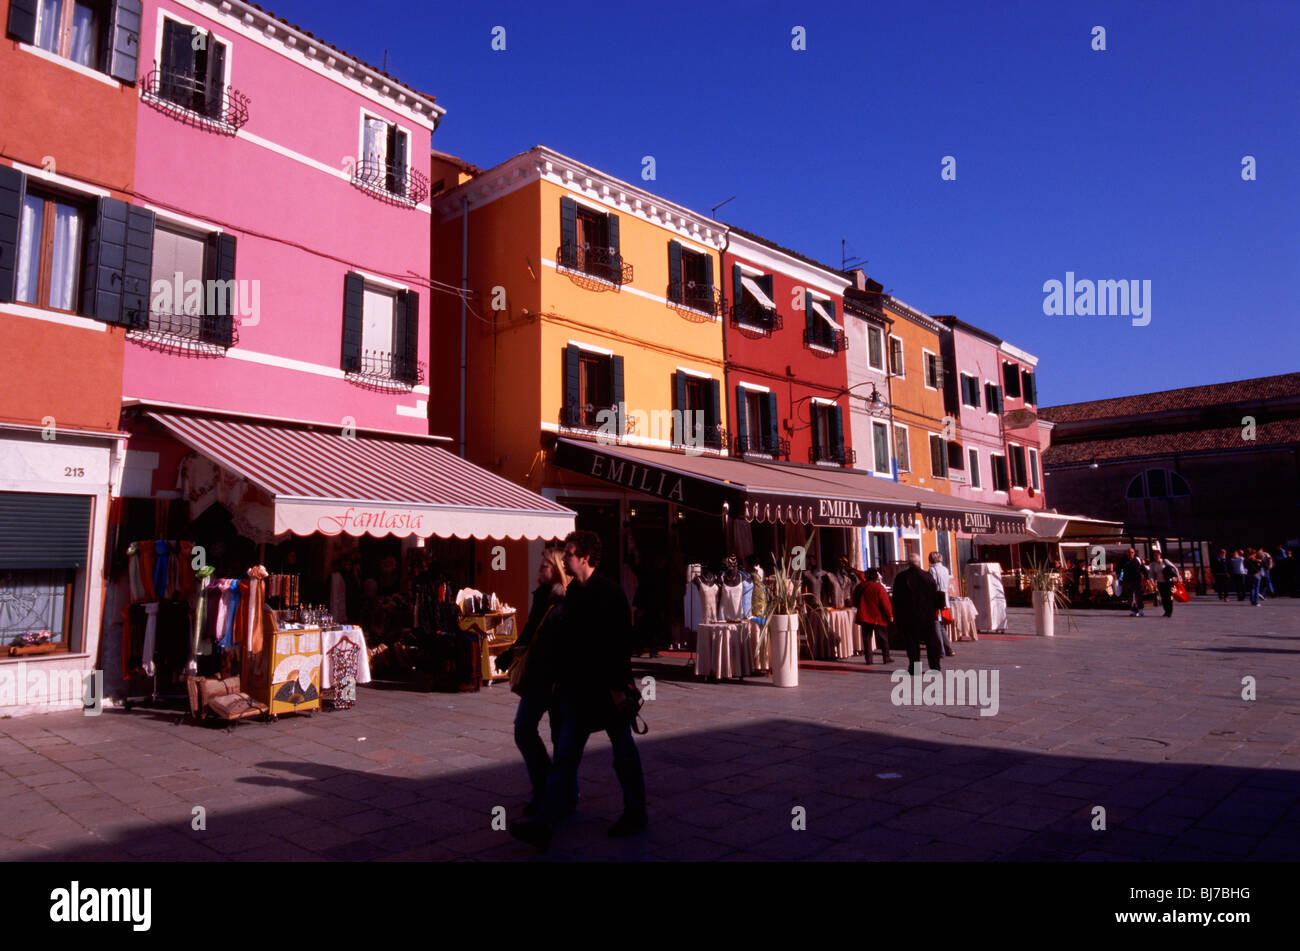 Venice, March 2008 -- Brightly colored houses on Burano, an island in the Venetian lagoon. Stock Photo